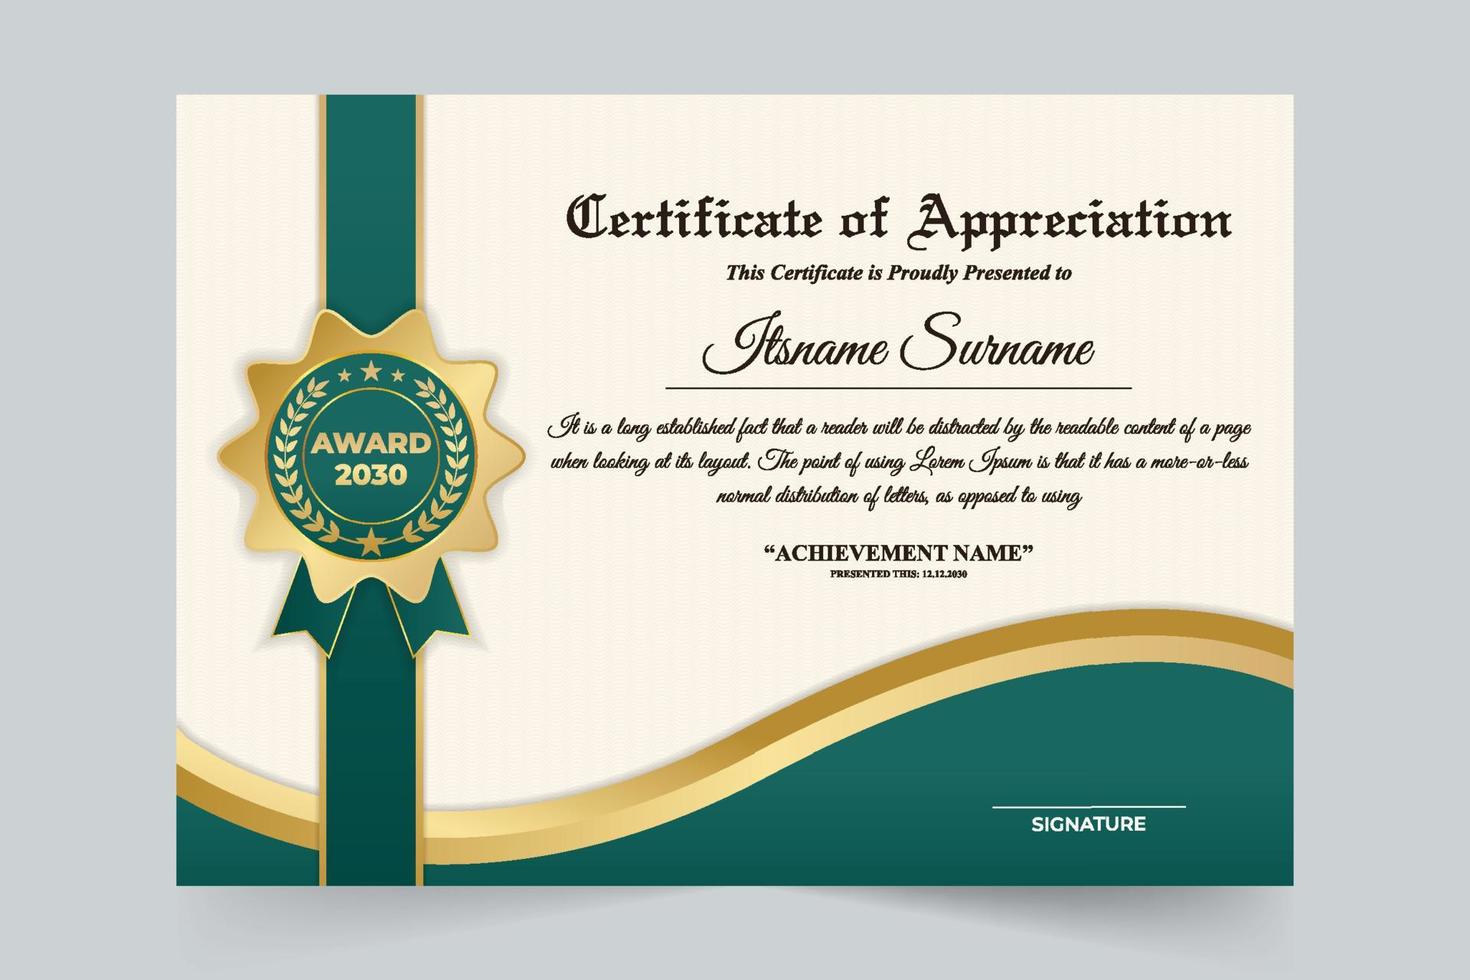 Creative award certificate decoration with green and golden colors. Honor recognition paper and credential vector for academic or official occasions. Achievement certificate frame layout vector.